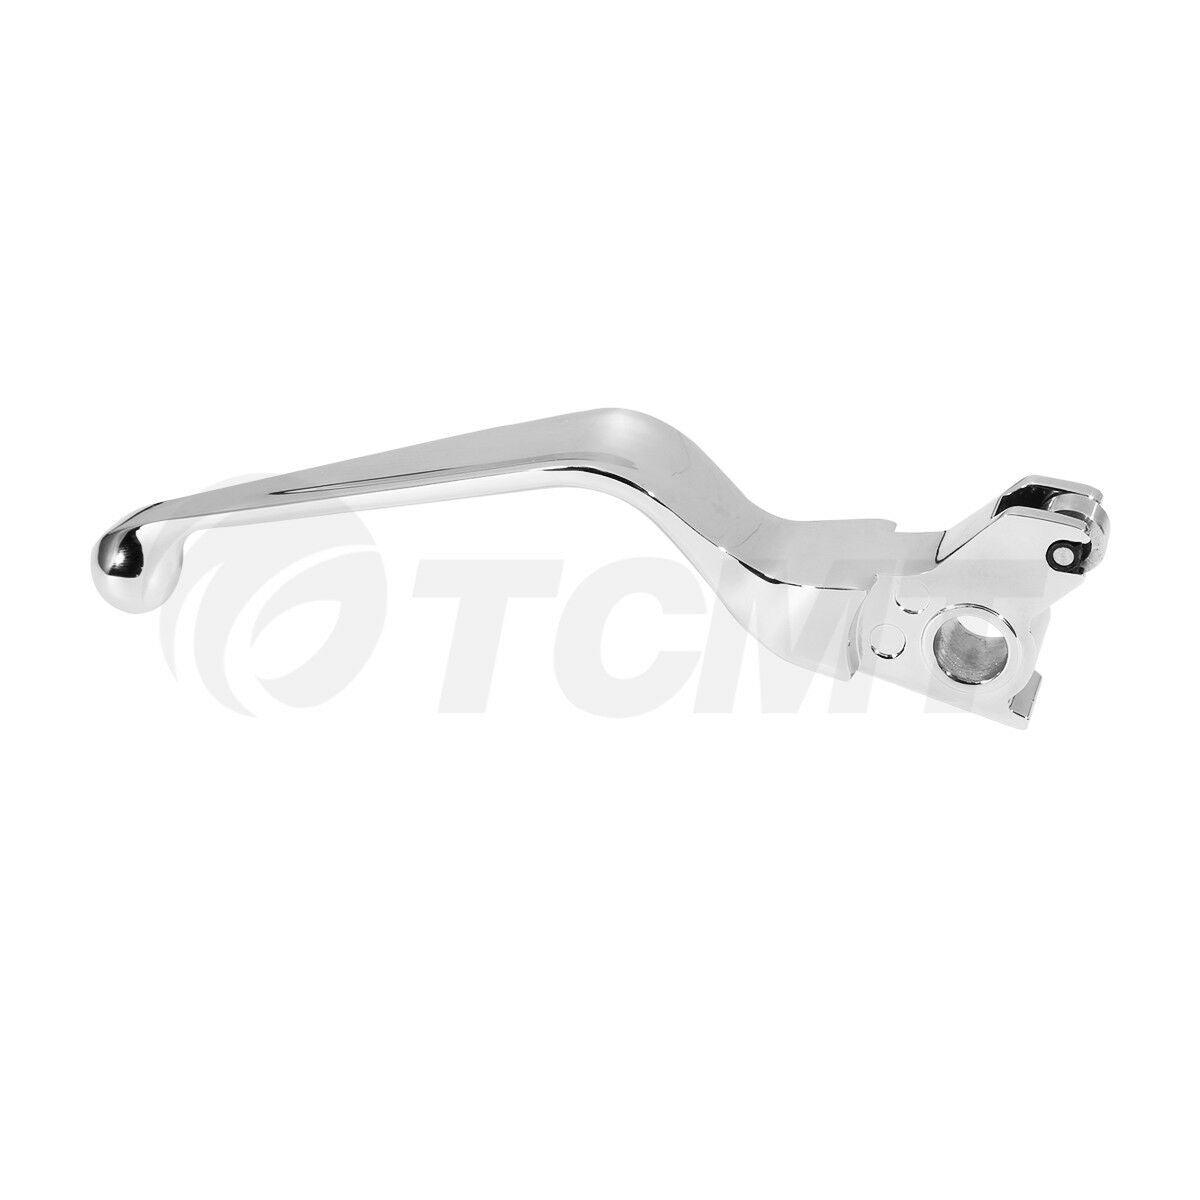 Aluminum Silver Wide Blade Hand Clutch Lever Fit For Harley V Rod VRod 2002-2005 - Moto Life Products